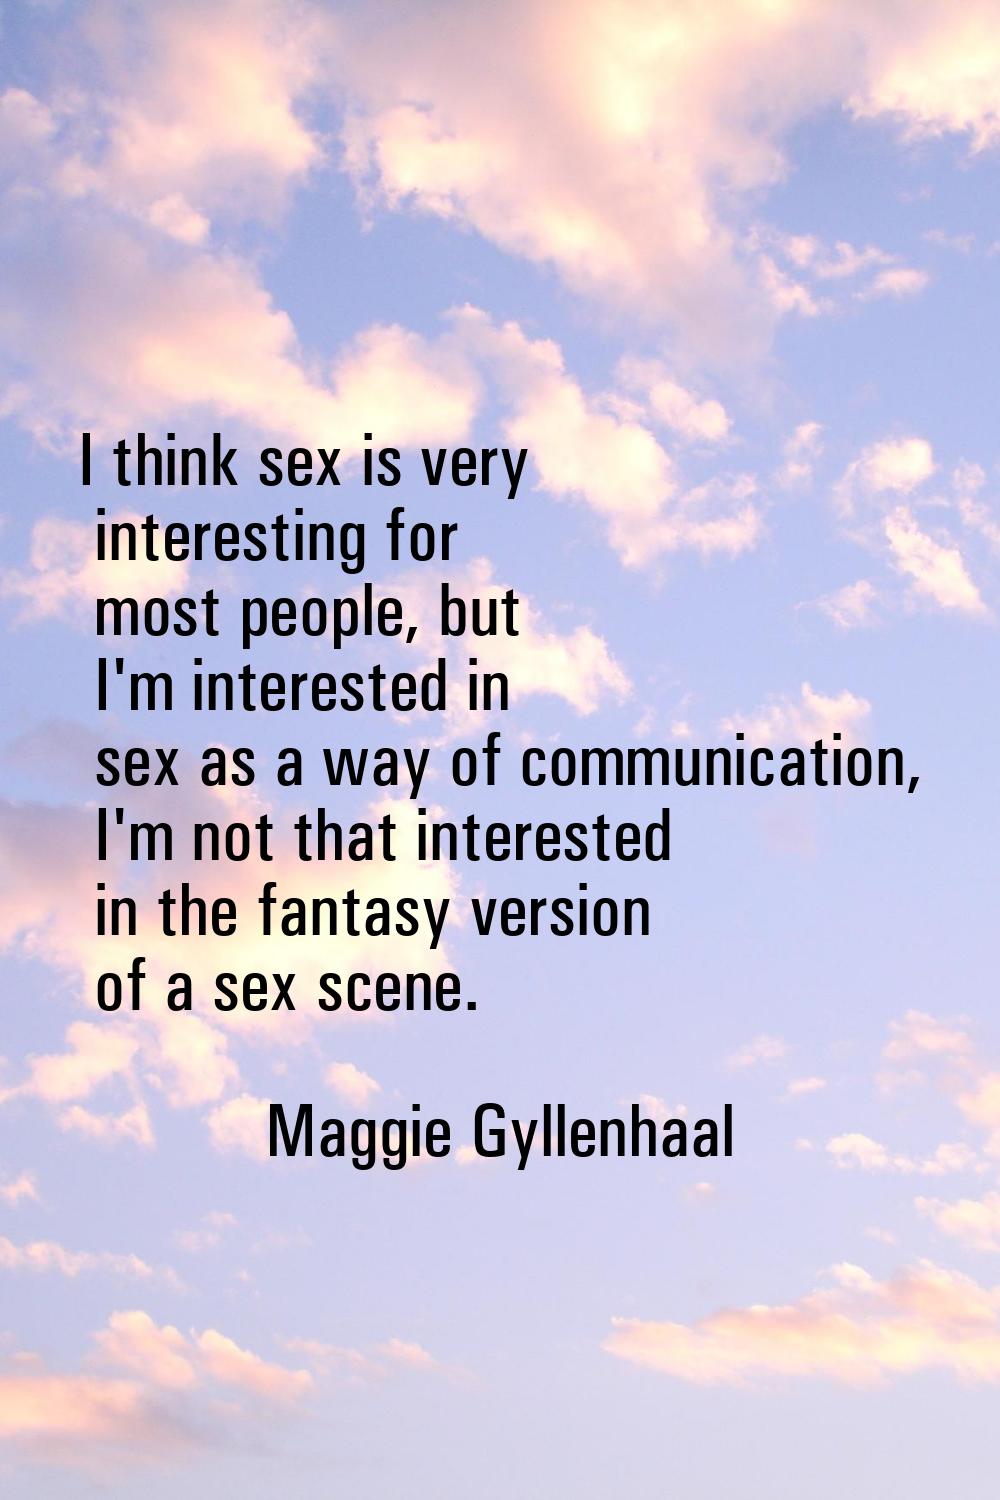 I think sex is very interesting for most people, but I'm interested in sex as a way of communicatio